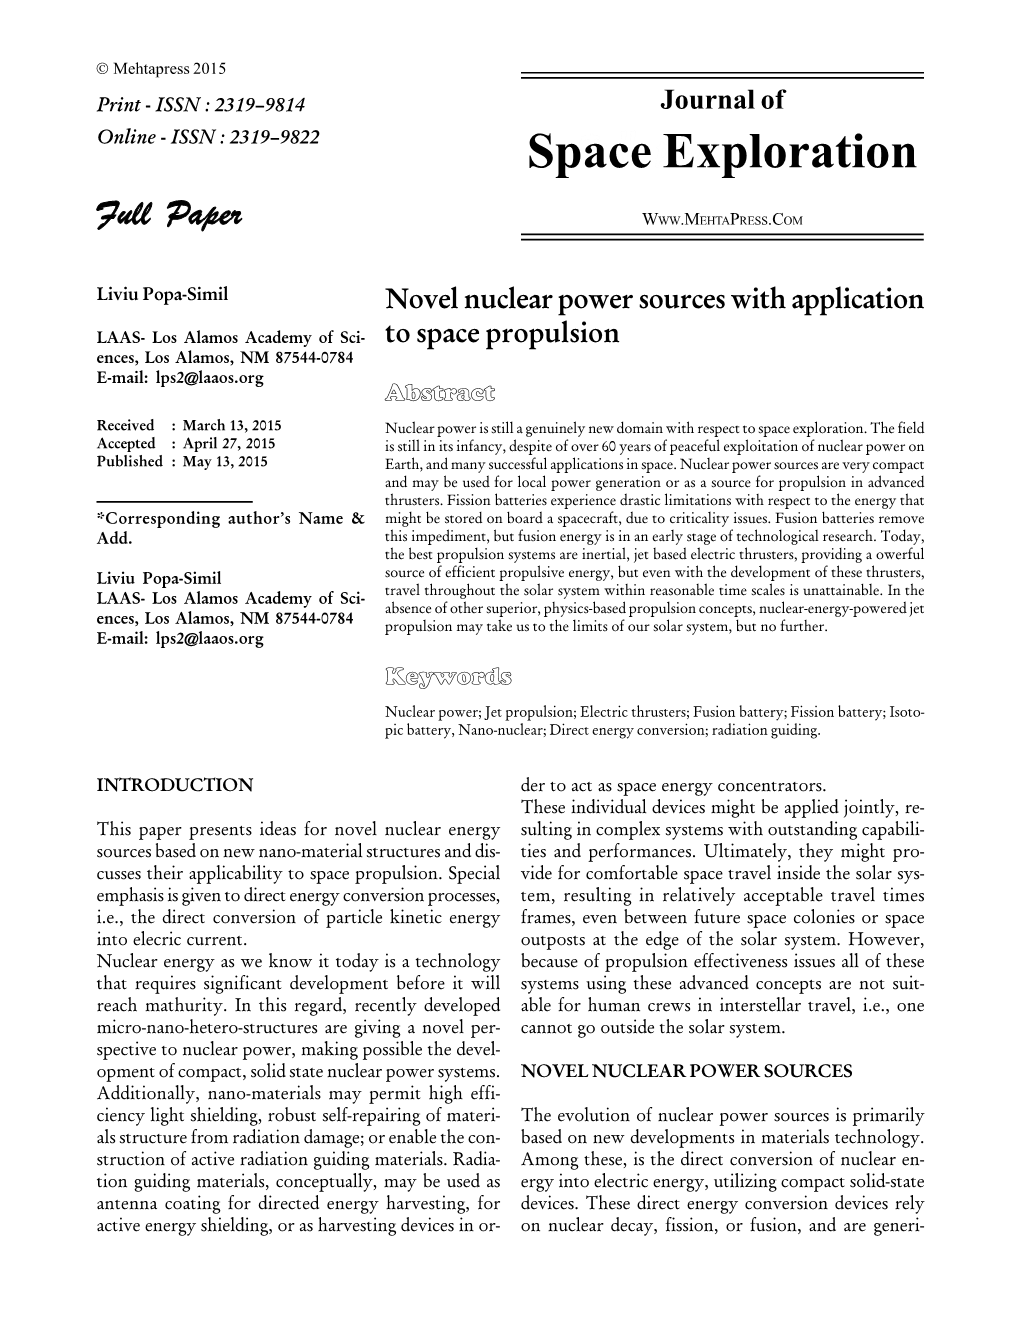 Novel Nuclear Power Sources with Application to Space Propulsion